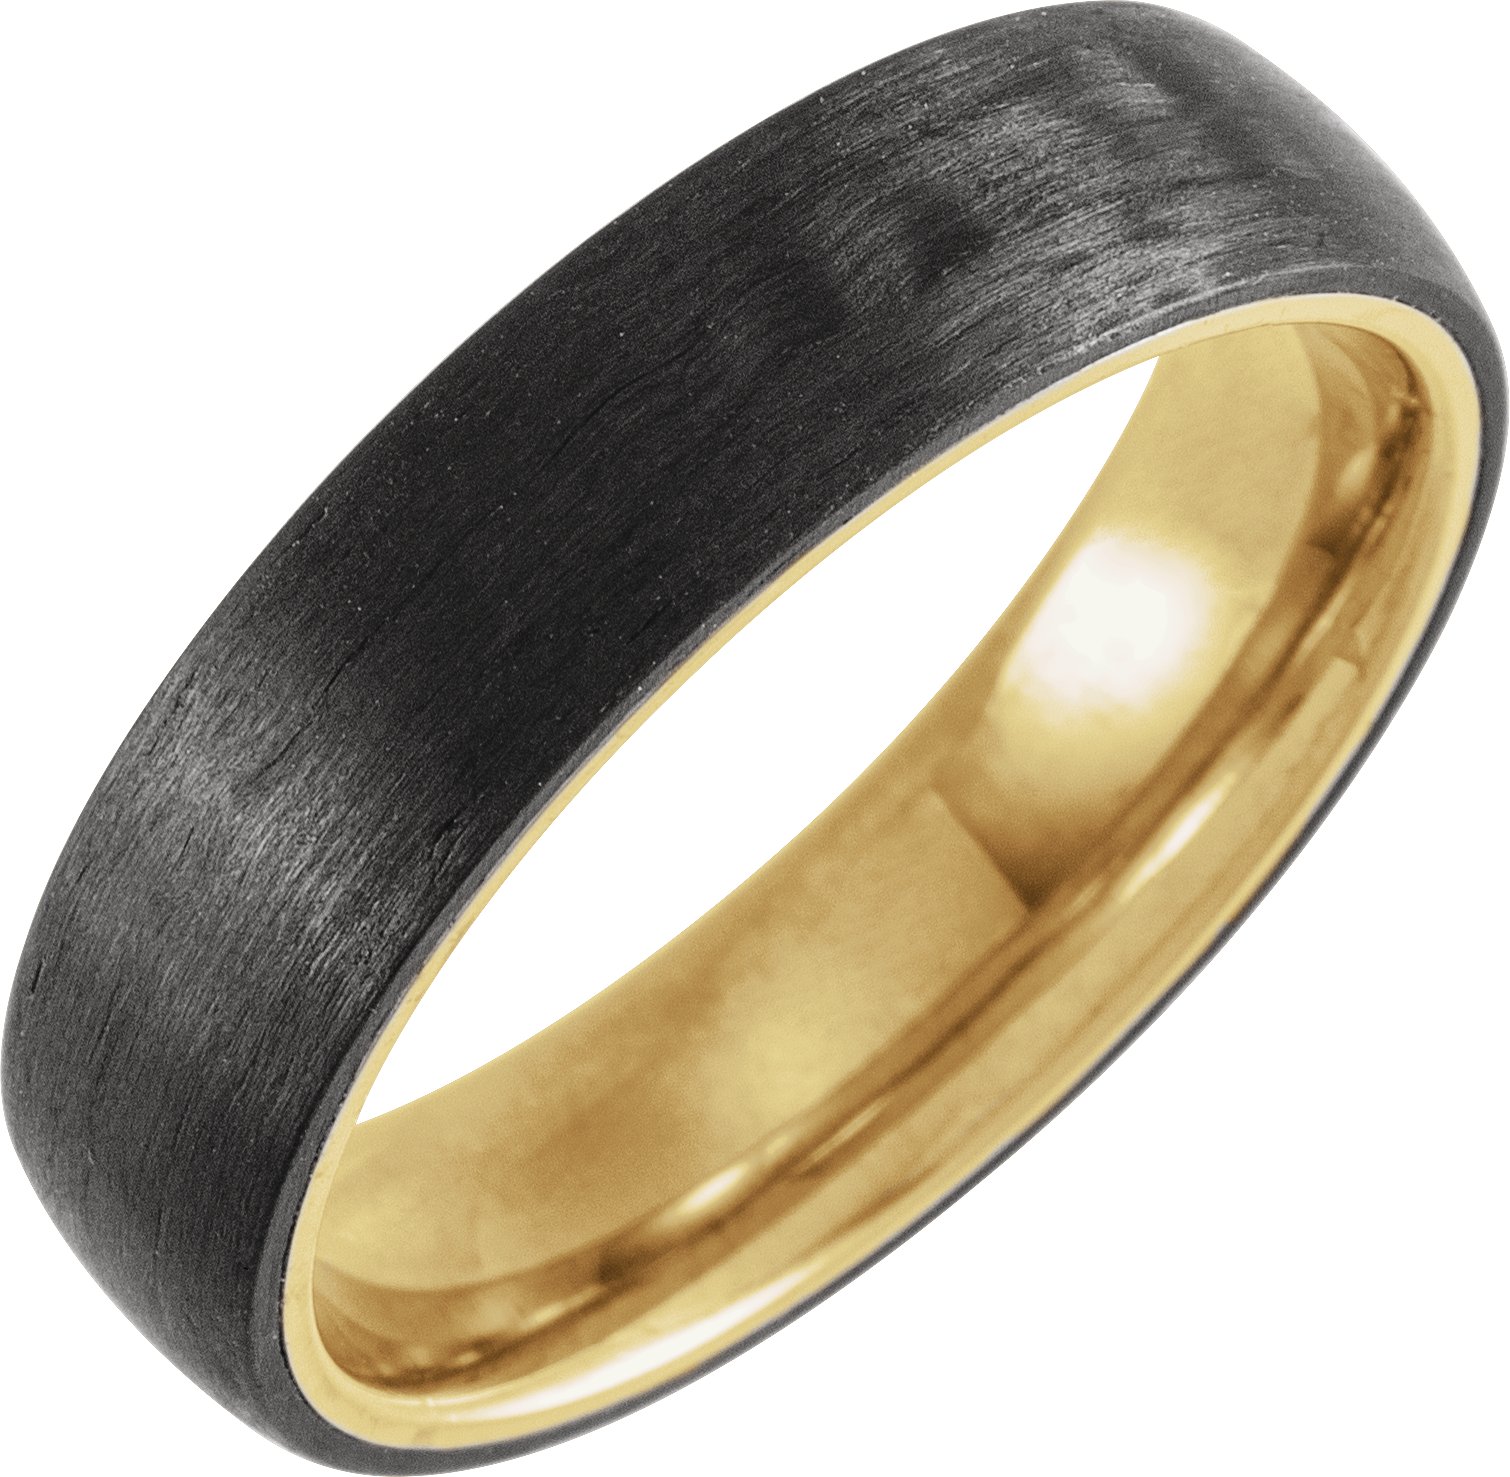 18K Yellow Gold PVD Titanium and Carbon Fiber 6 mm Half Round Band Size 13 Ref 16653706